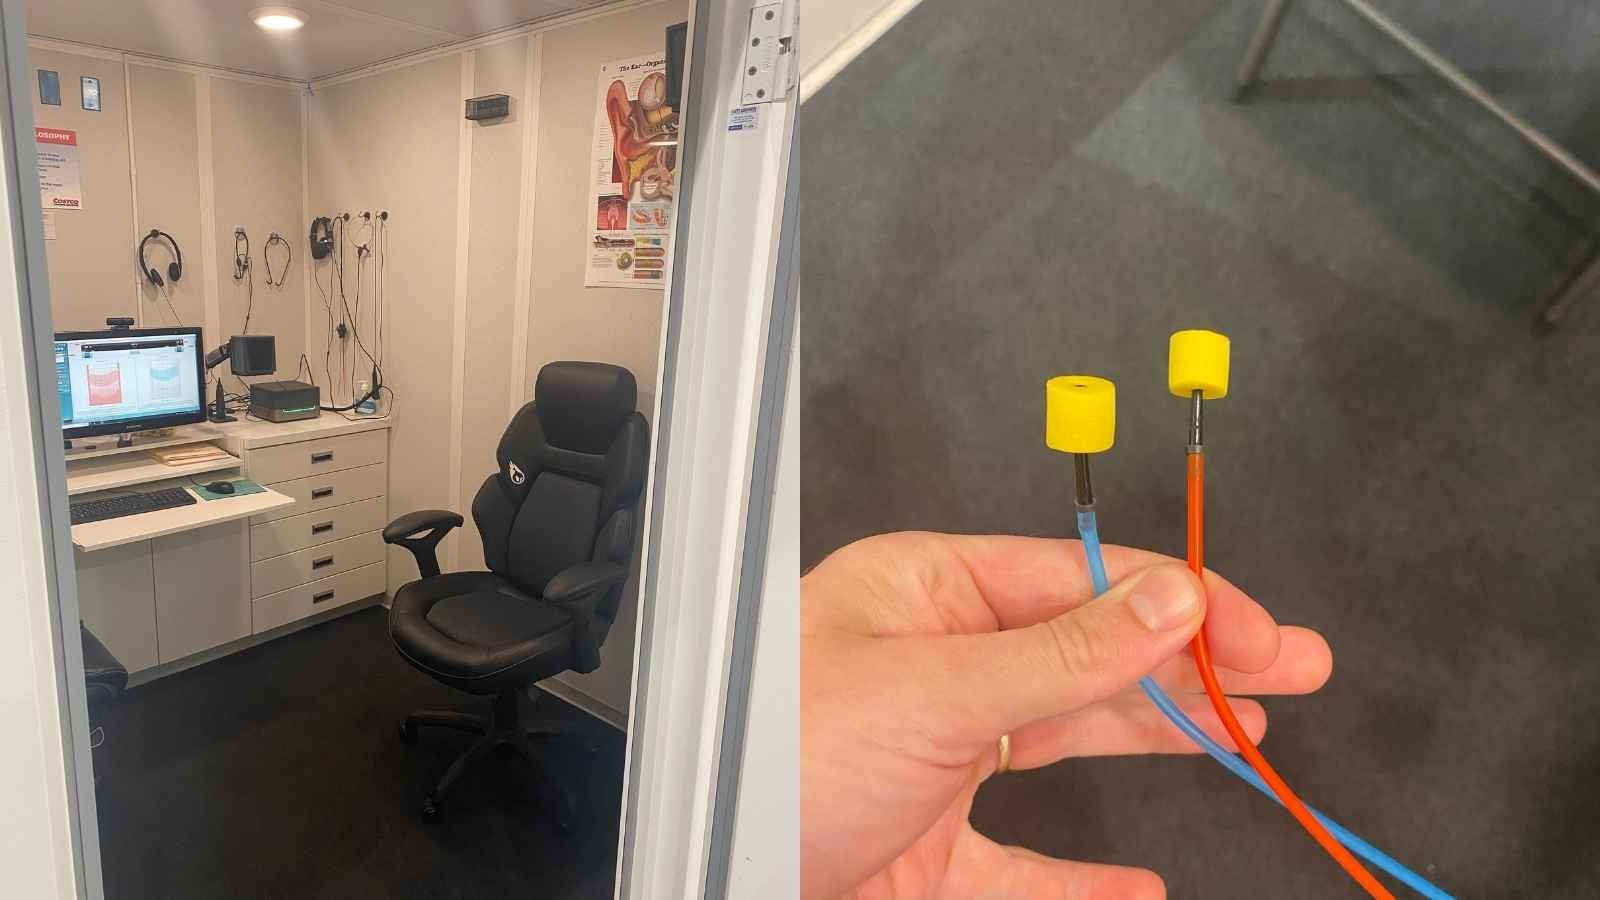 Image of the Costco hearing test booth and hearing test earbuds